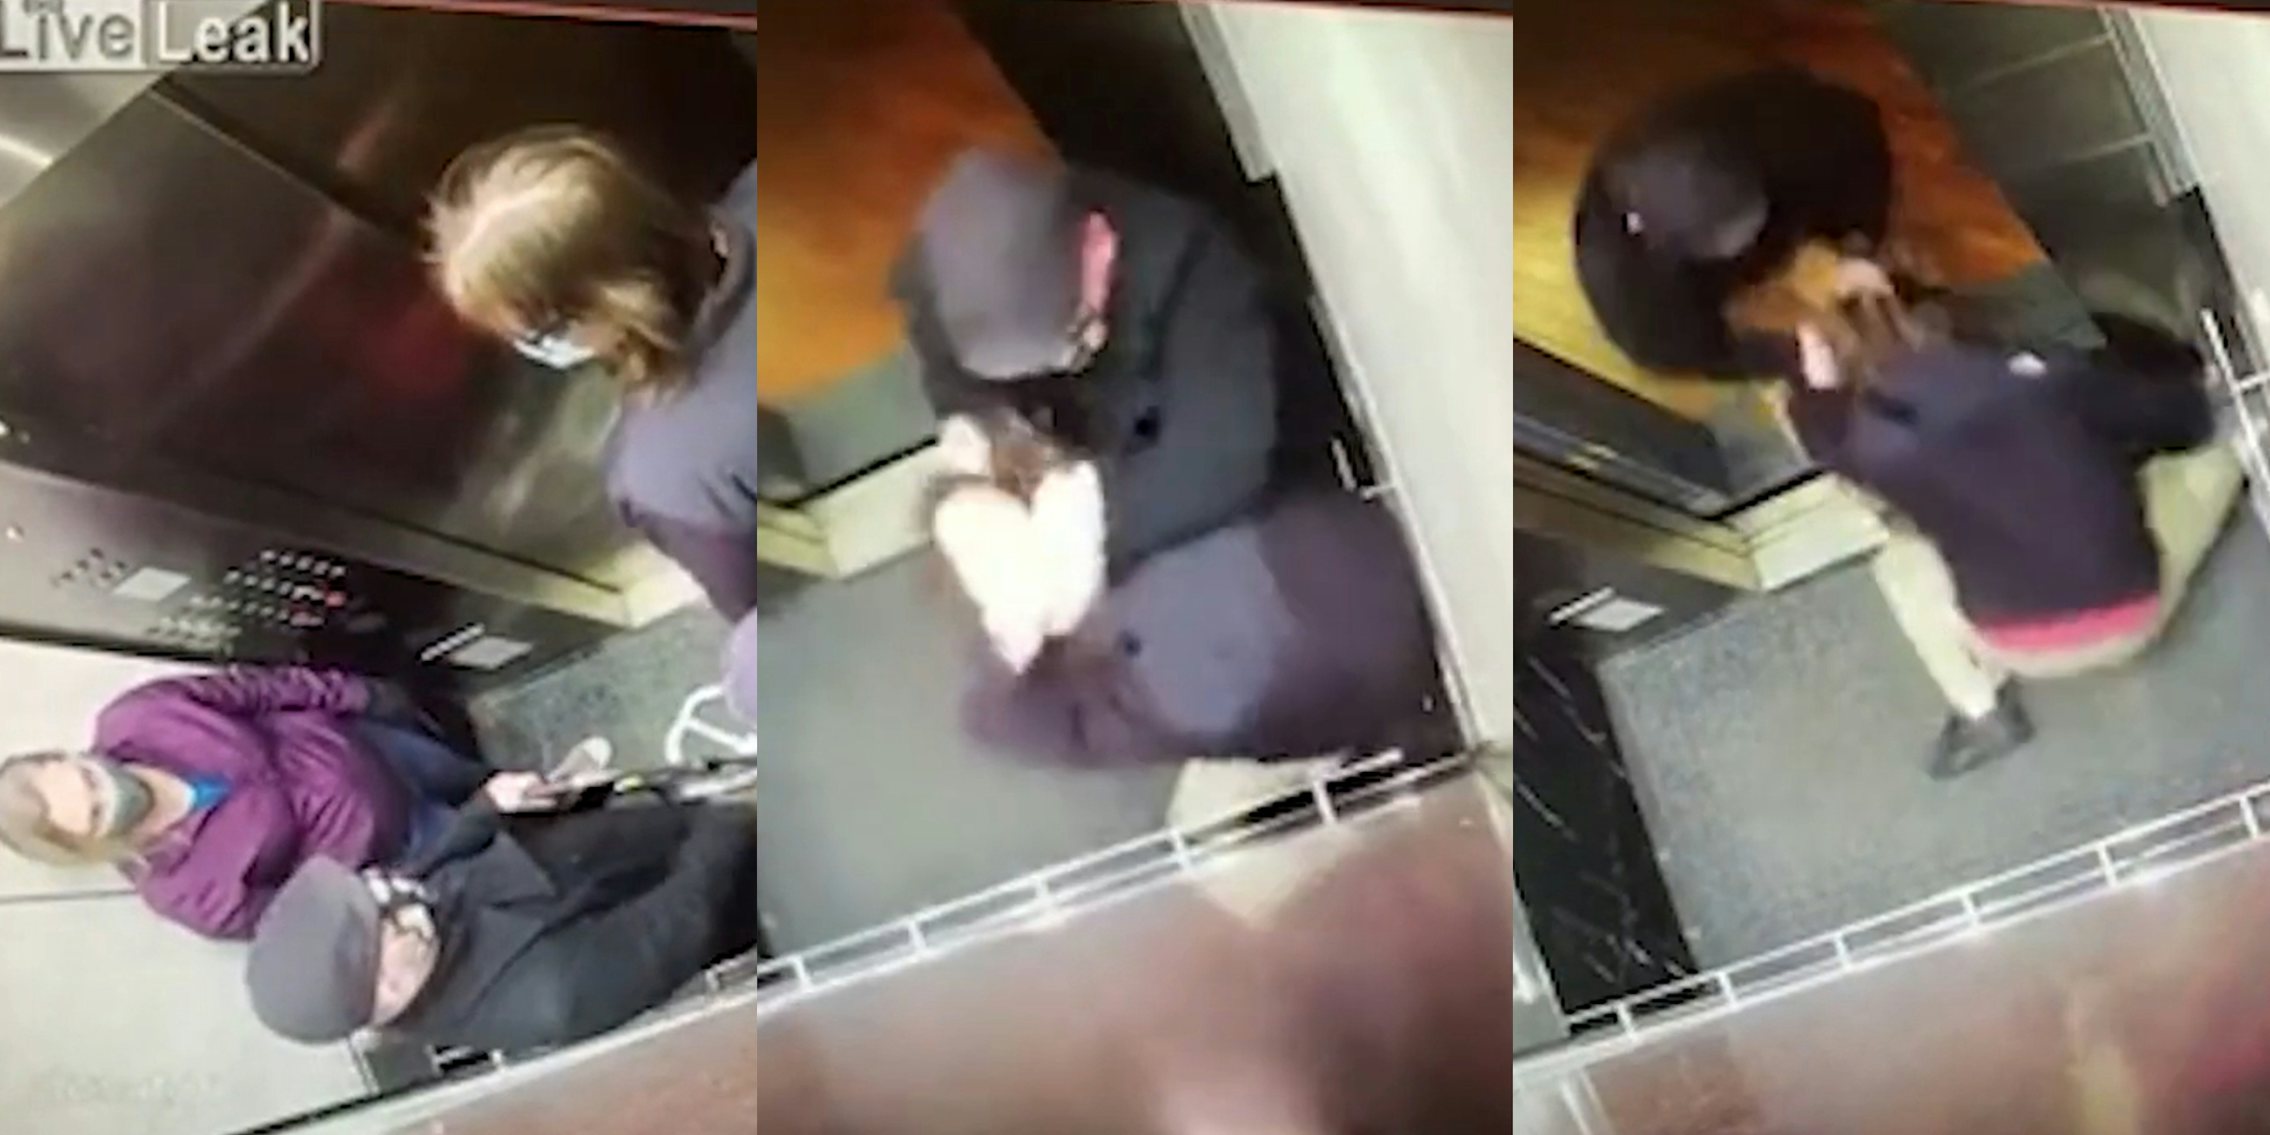 man standing on crowded elevator coughs toward couple, man grabs coughing man, drags him out of elevator by hair